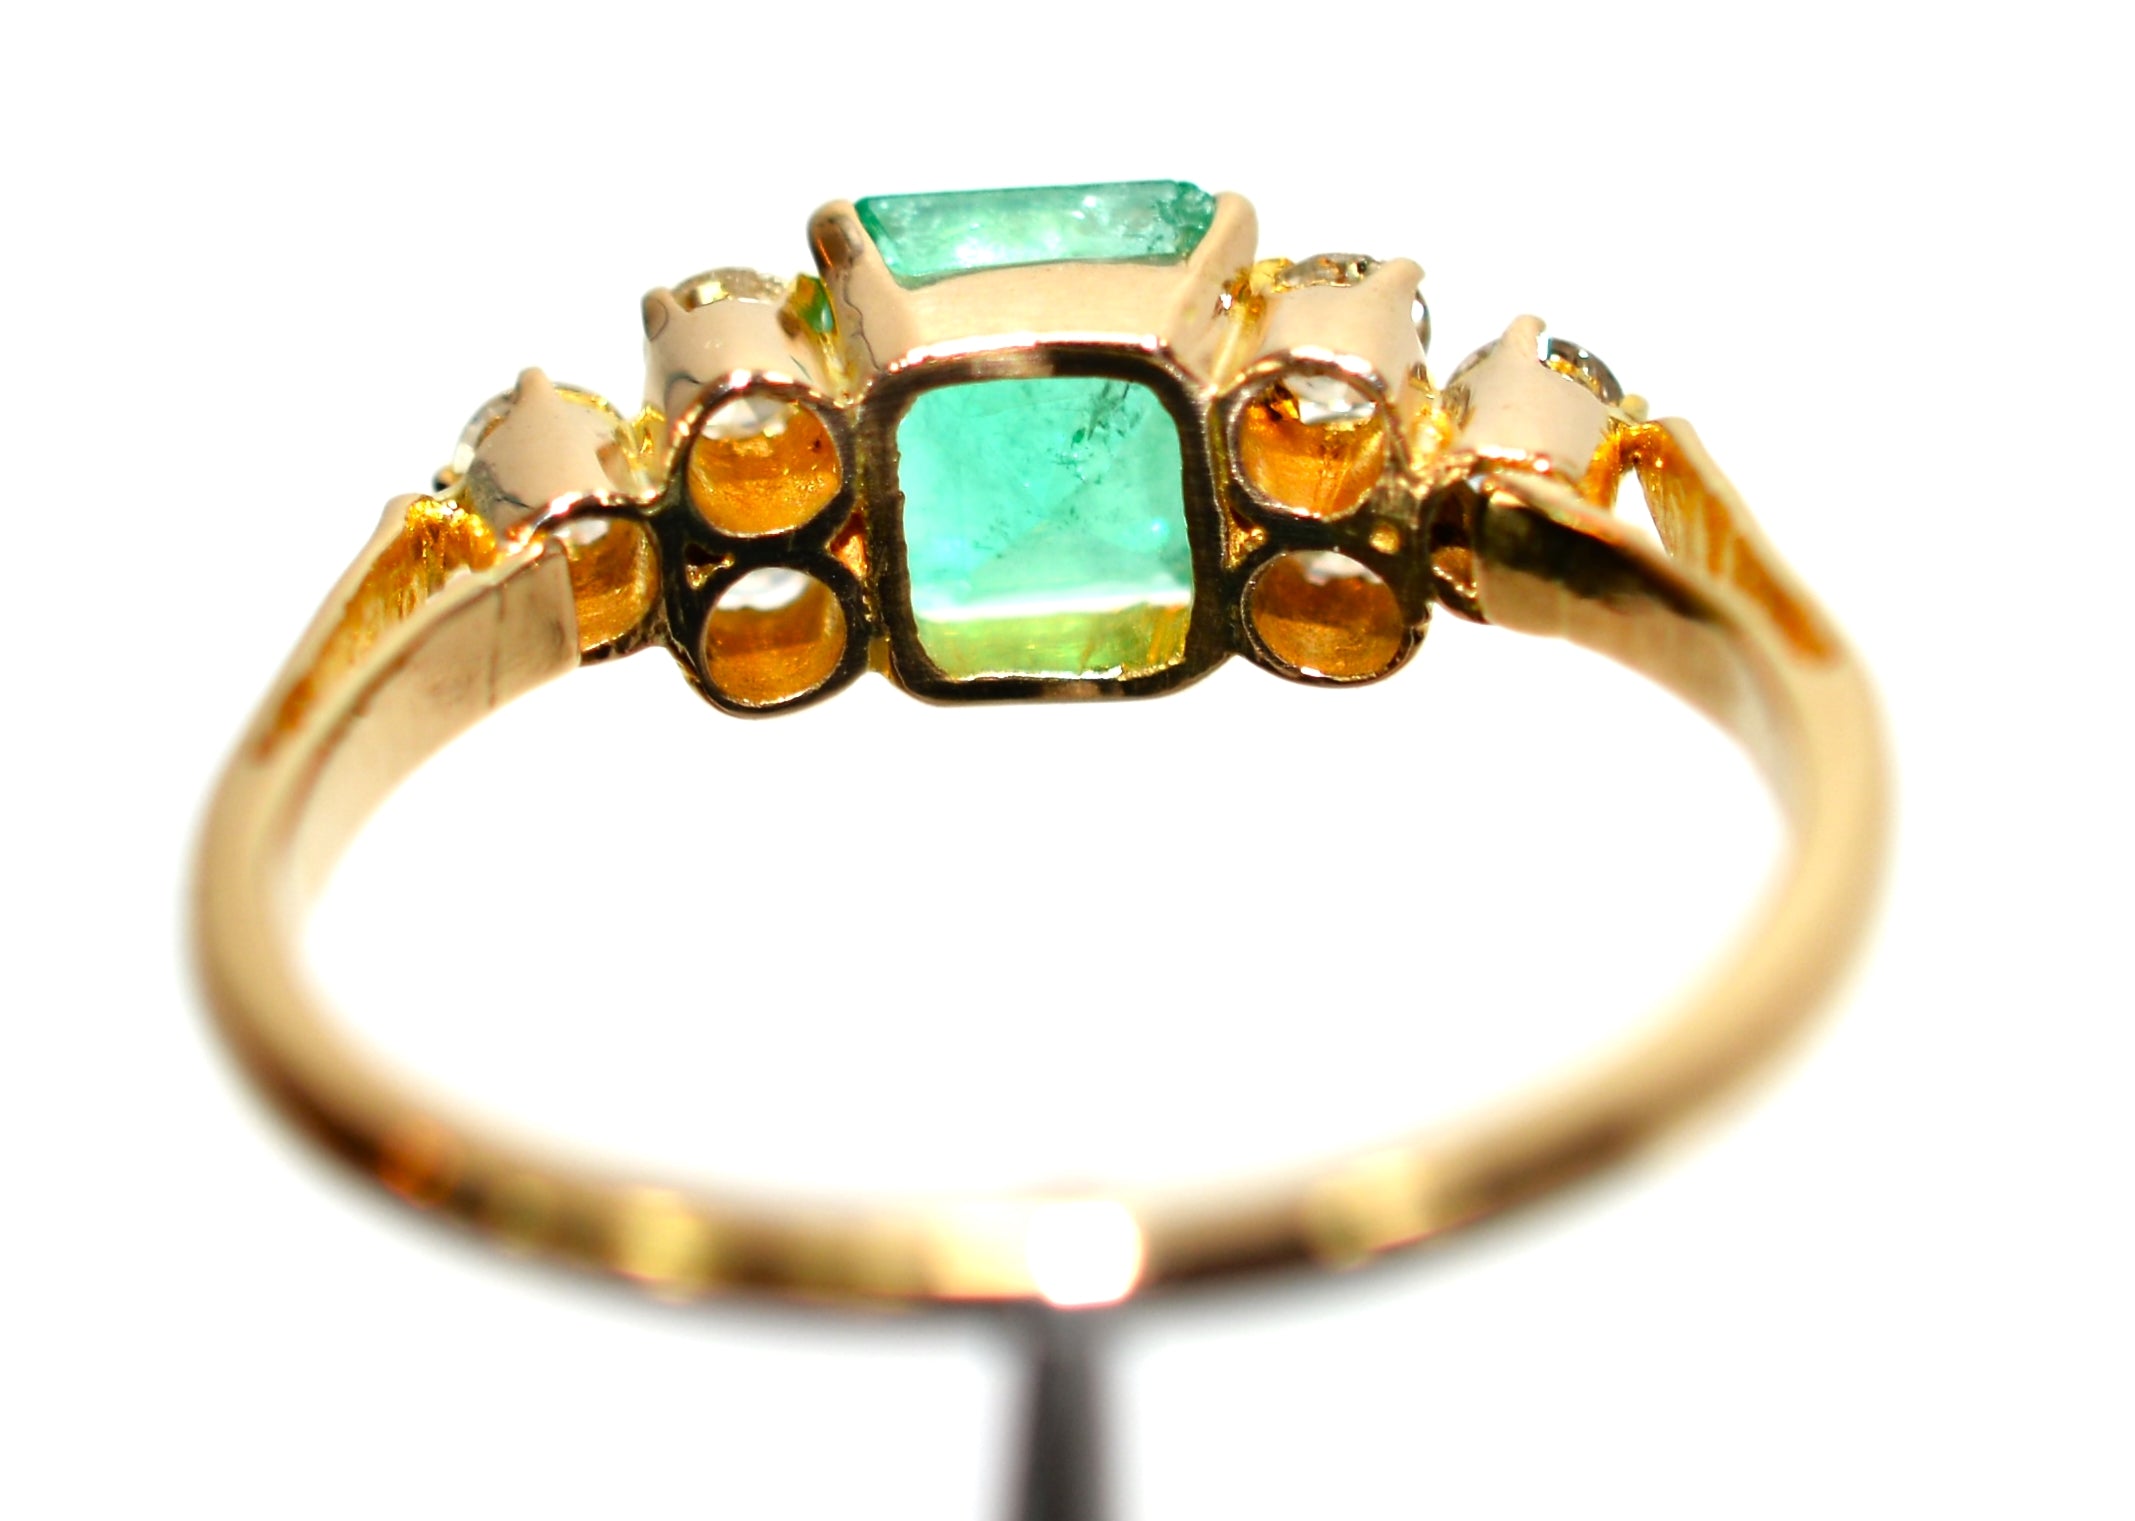 Natural Colombian Emerald & Diamond Ring 18K Solid Gold 1.18tcw Emerald Ring Birthstone Ring Green Ring Statement Ring Cocktail Ring Estate